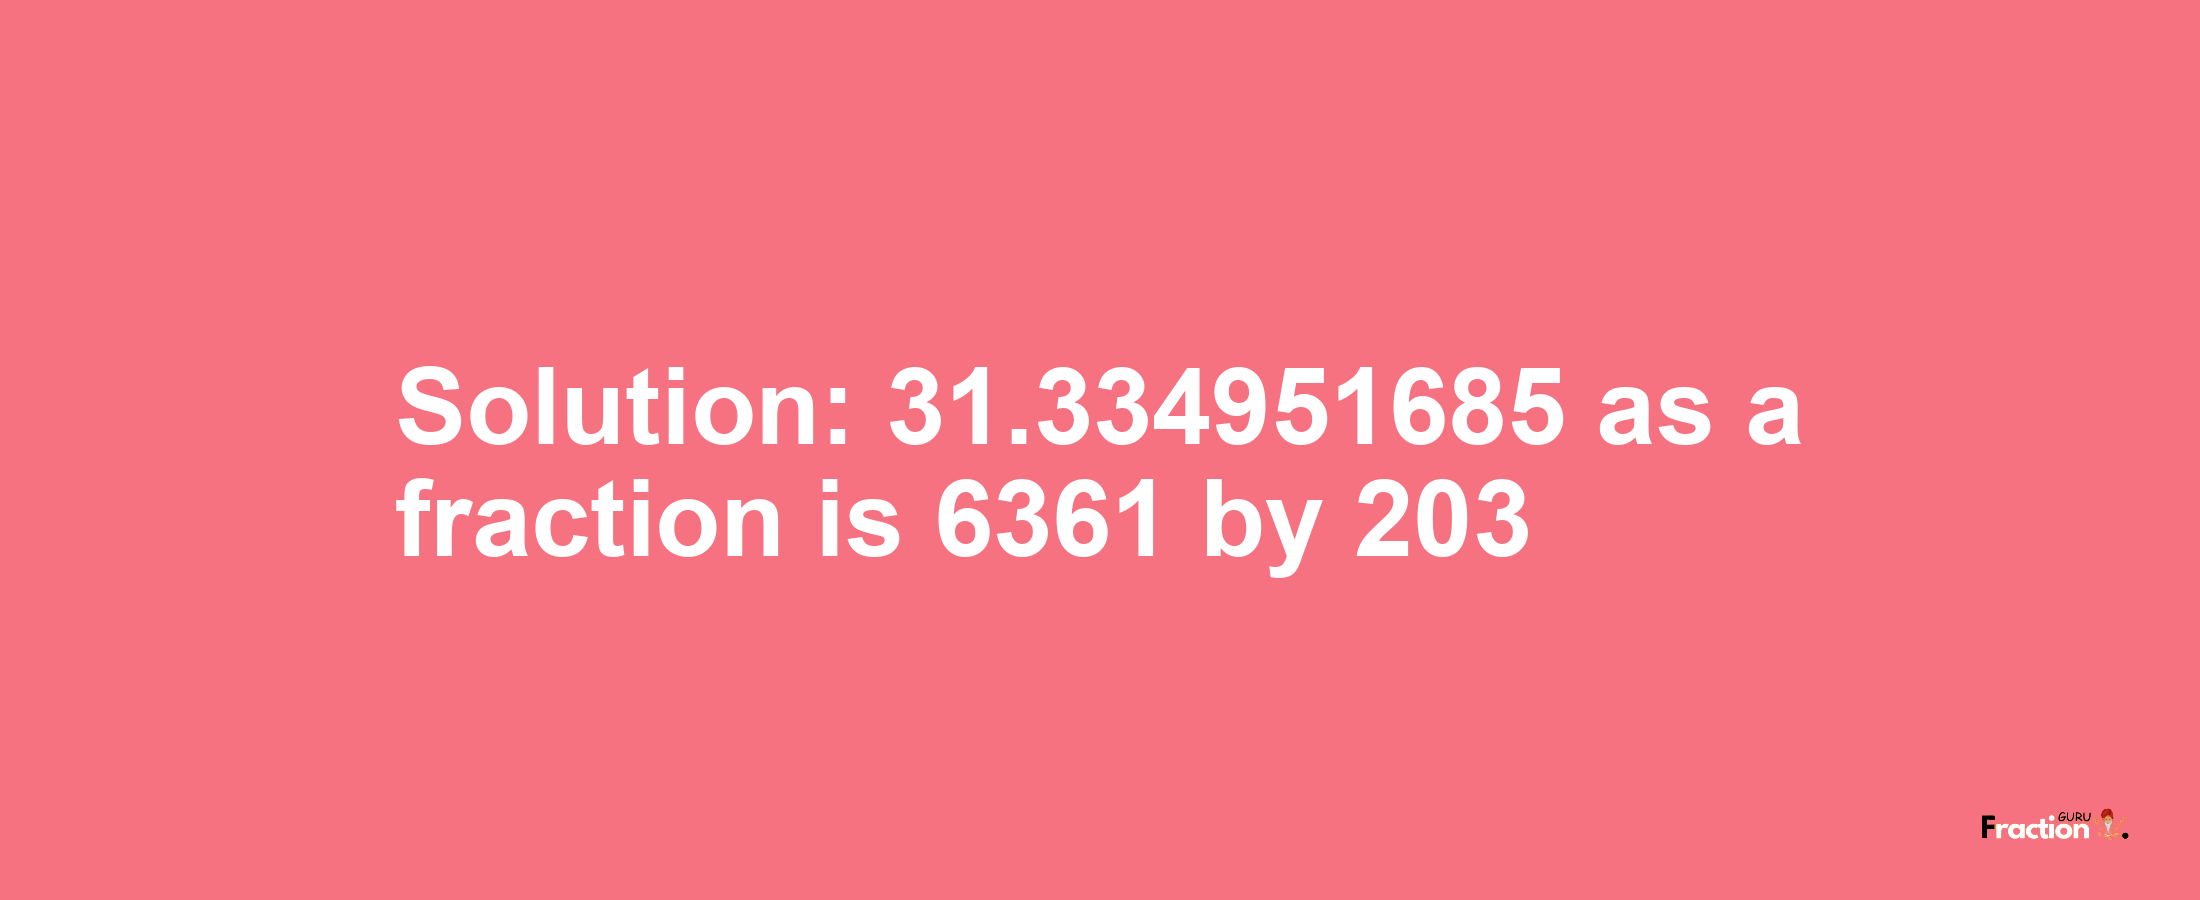 Solution:31.334951685 as a fraction is 6361/203